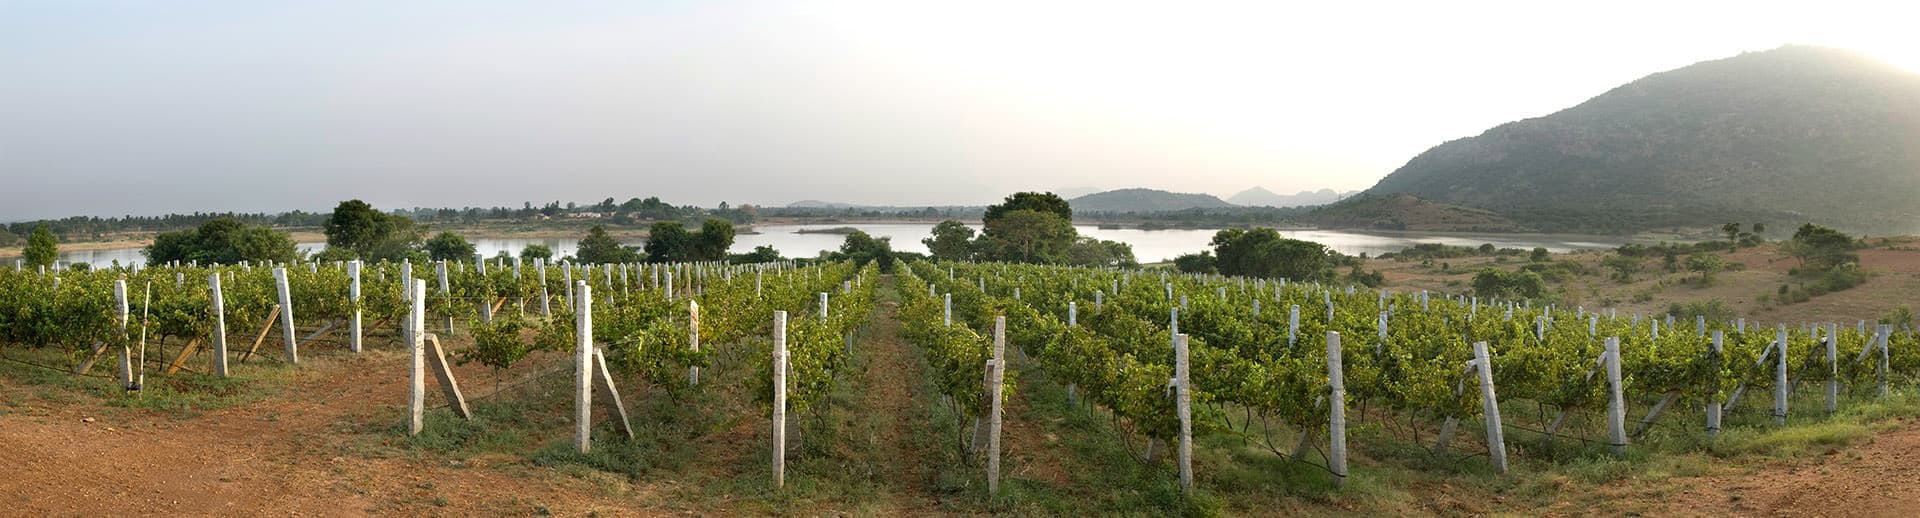 Vineyards at Nandi Hills outside of Bangalore, Karnataka, India, is one of the most well respected and reviewed wineries emerging in India.